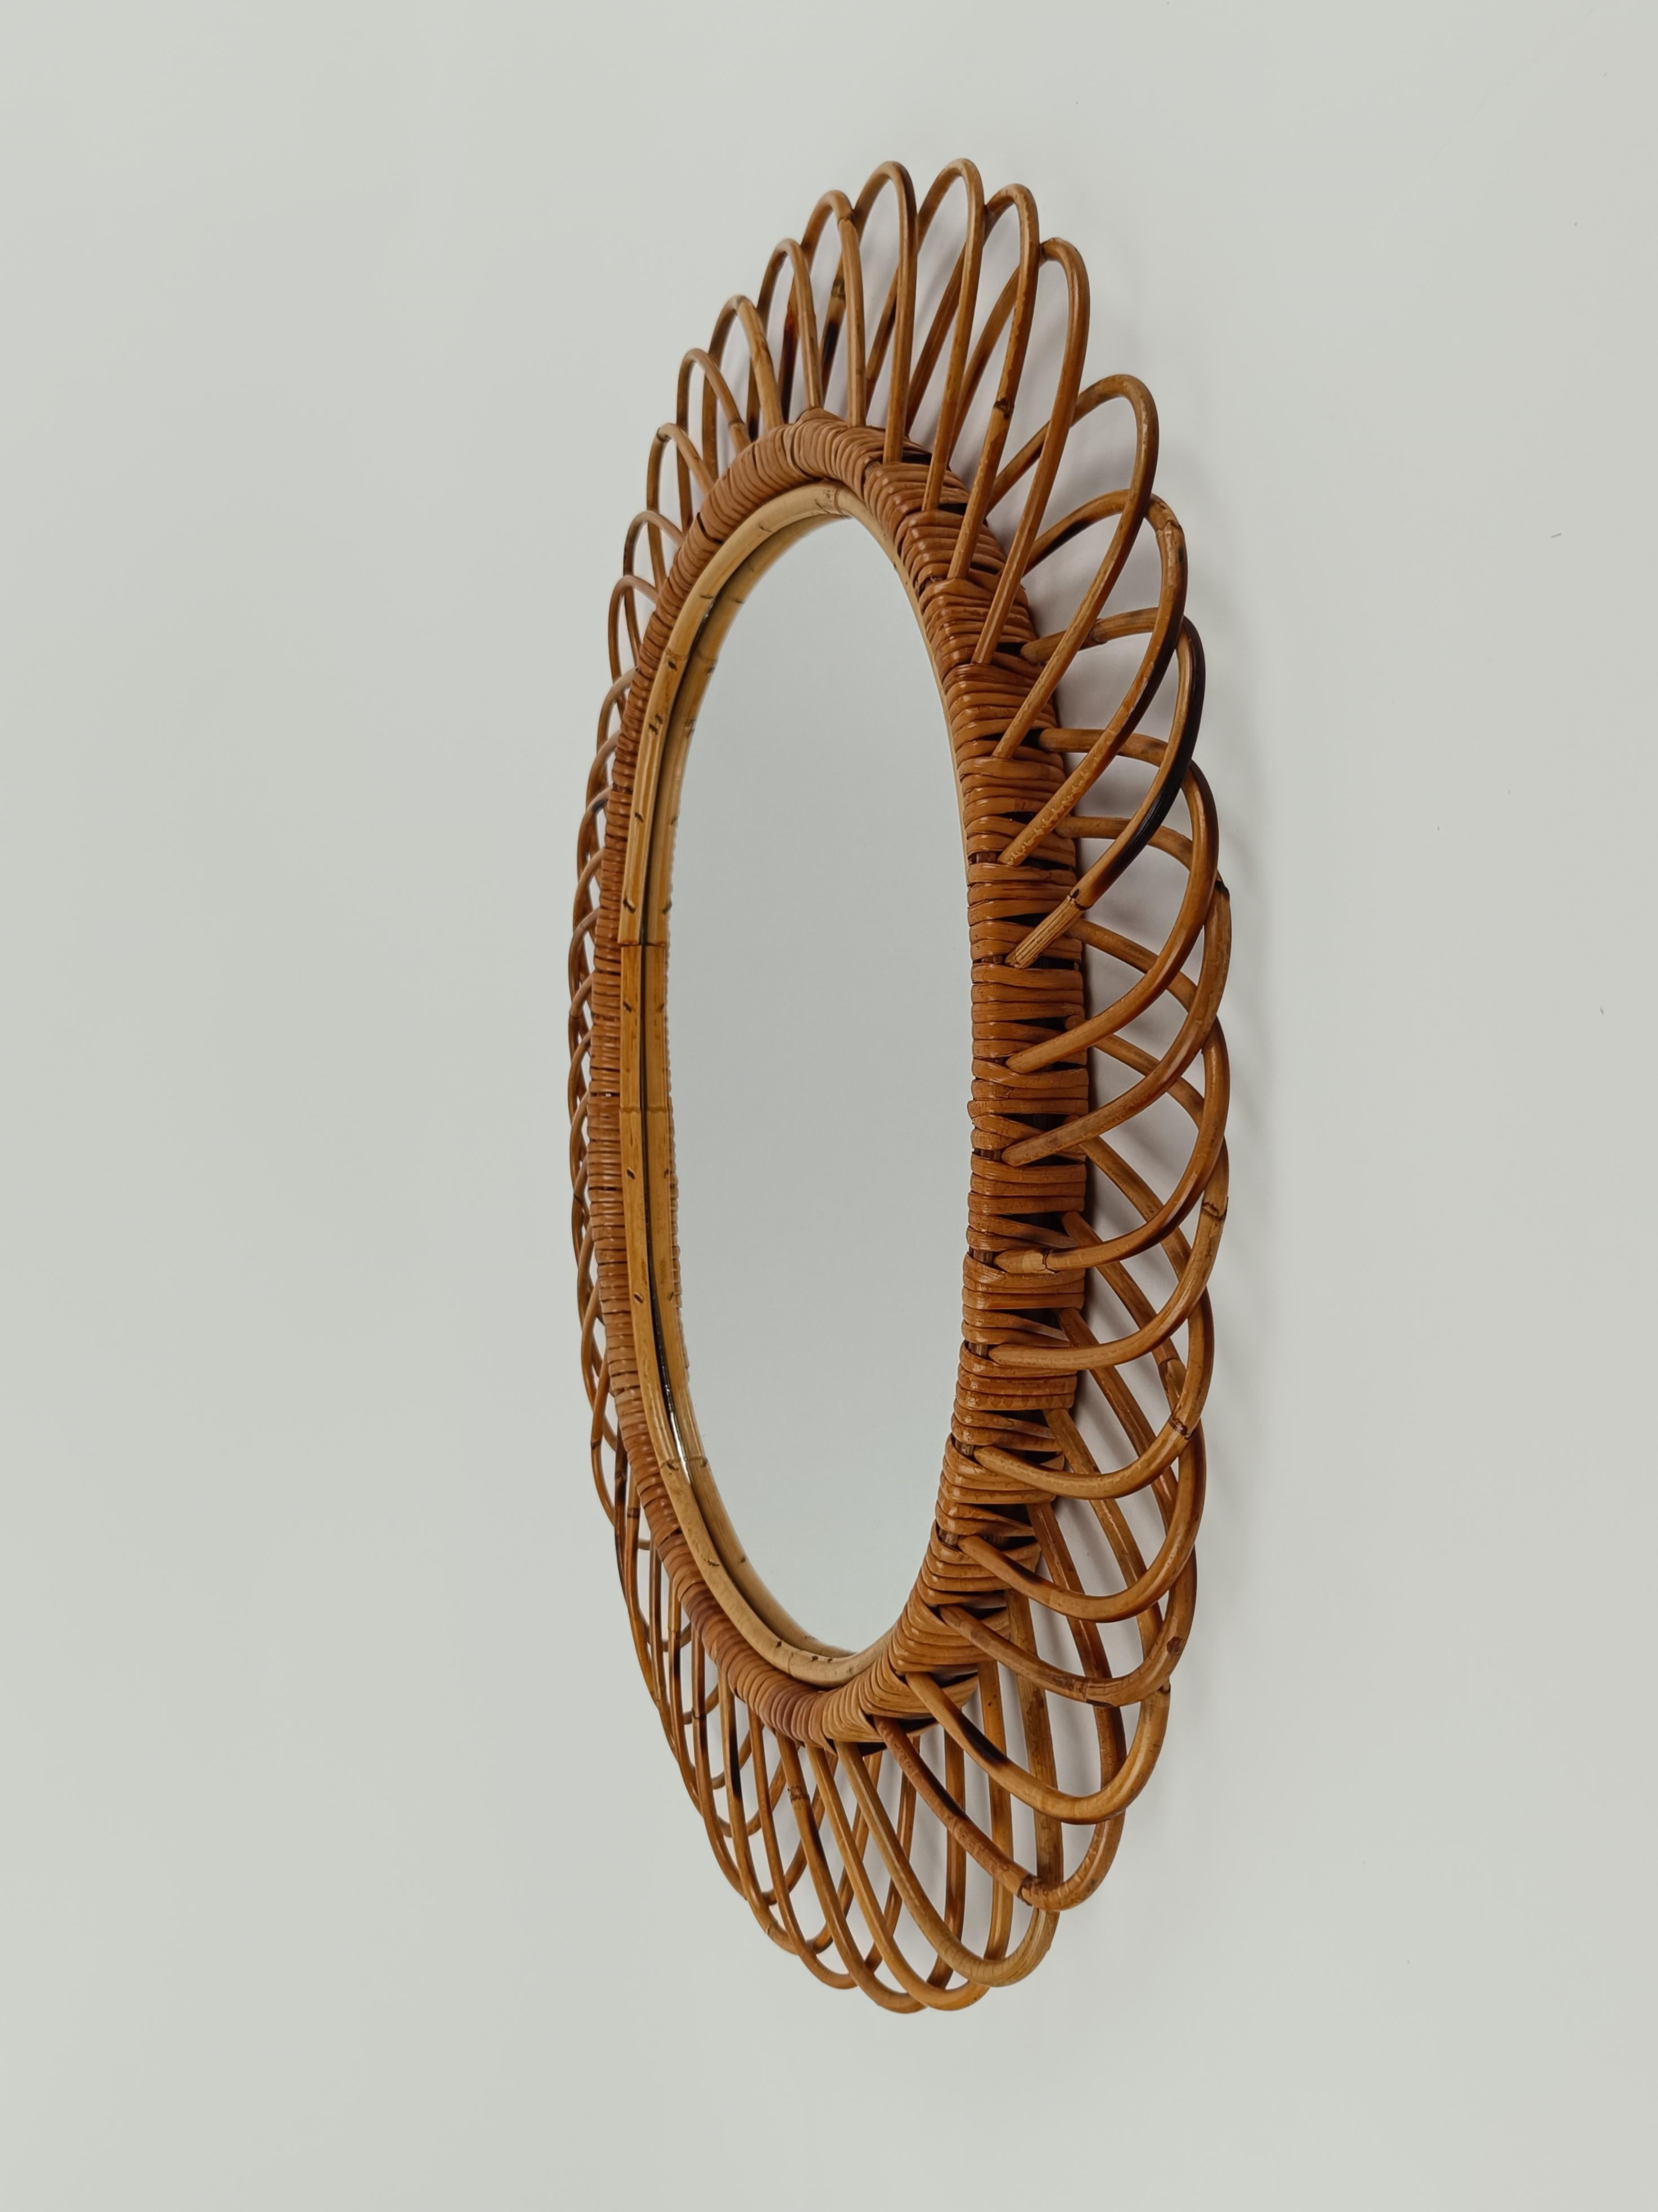  Italian Oval Mirror made in Bamboo, Cane and Rattan in the Riviera Style 1960s  For Sale 1